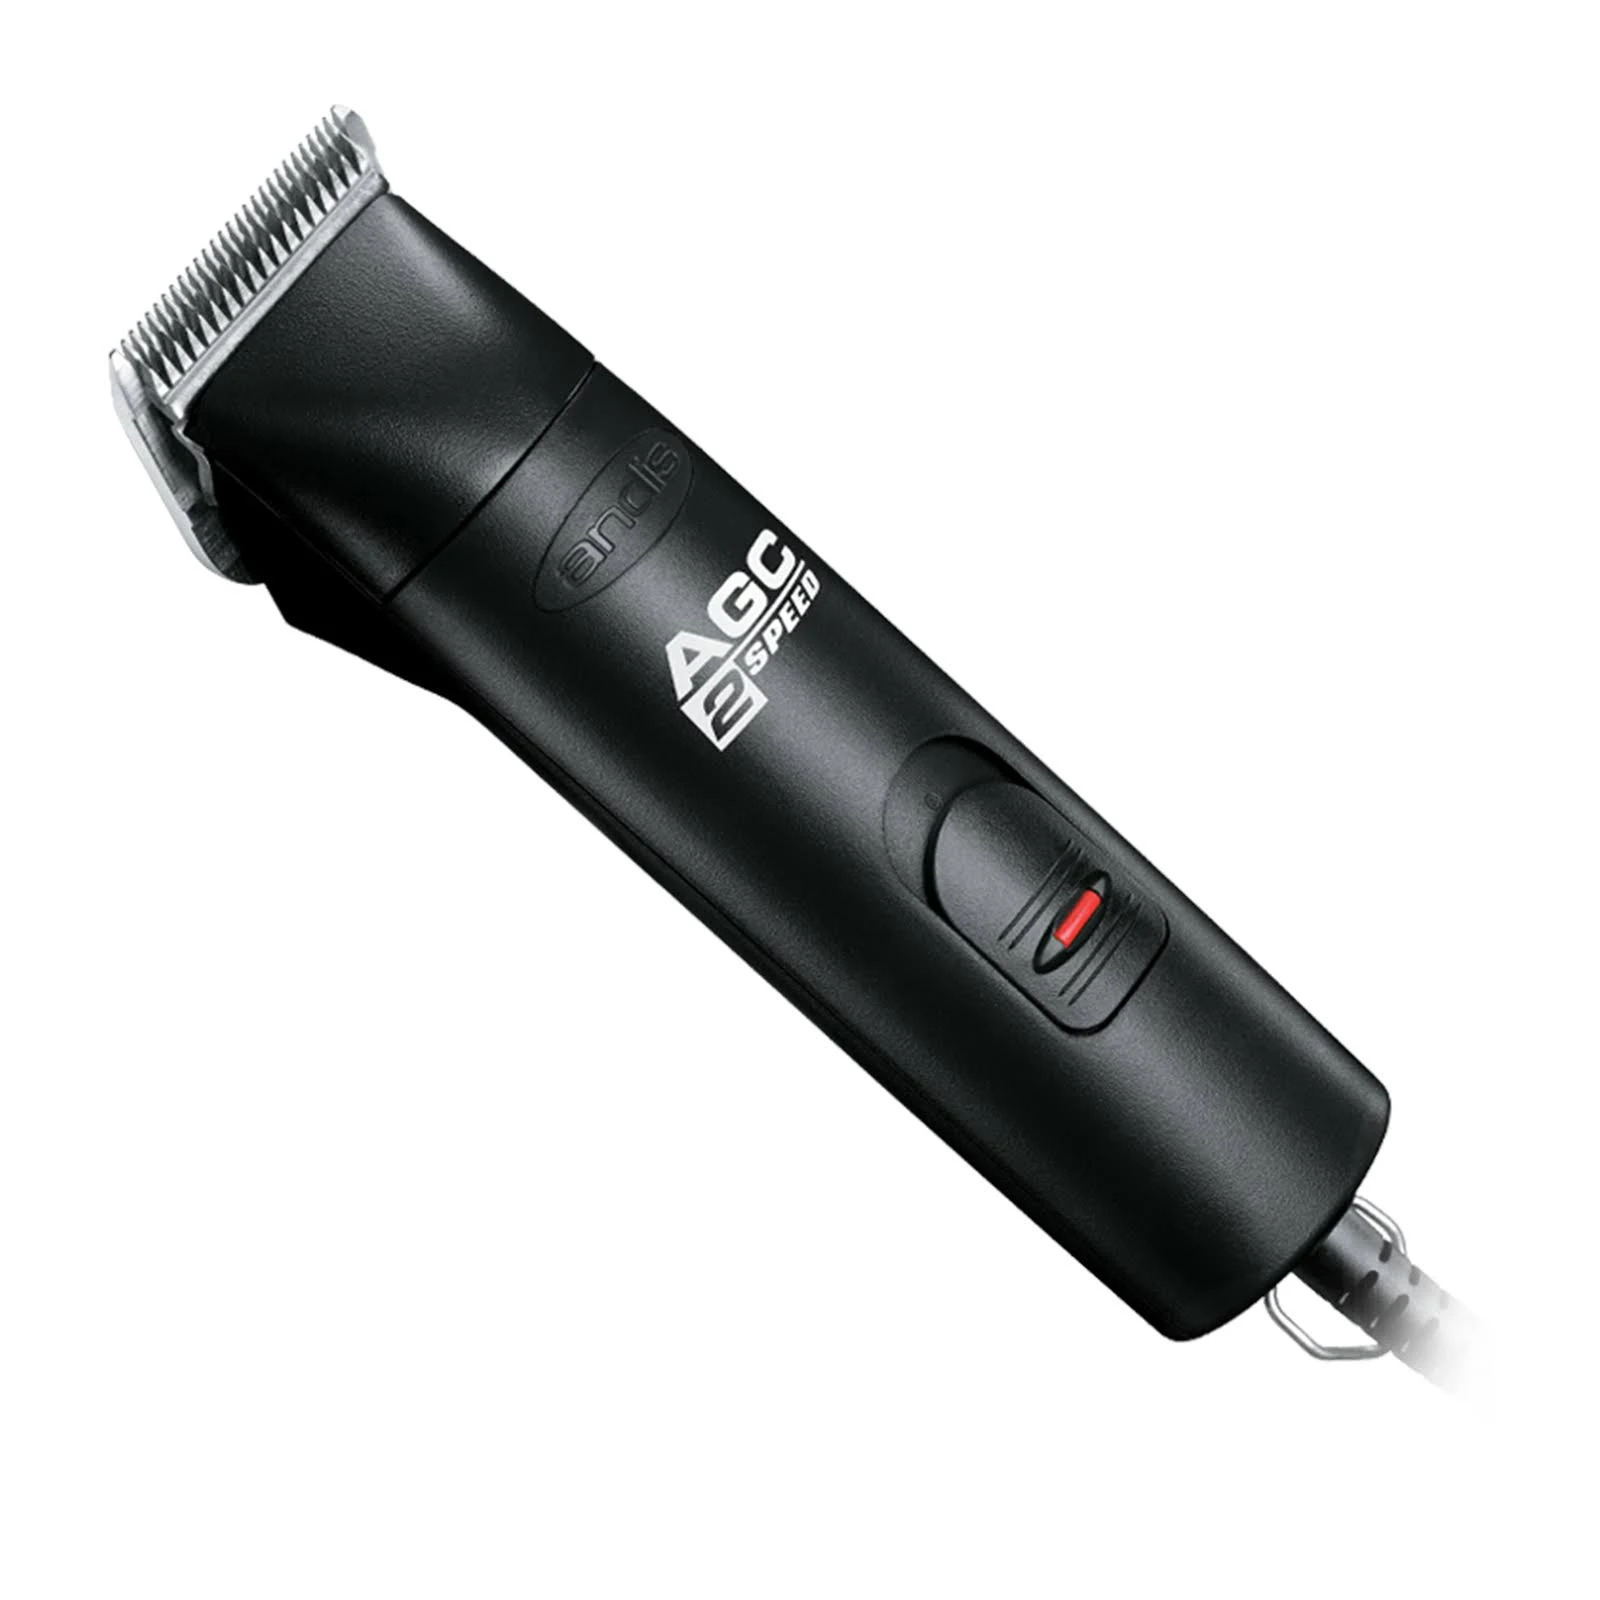 best ear and nose trimmer